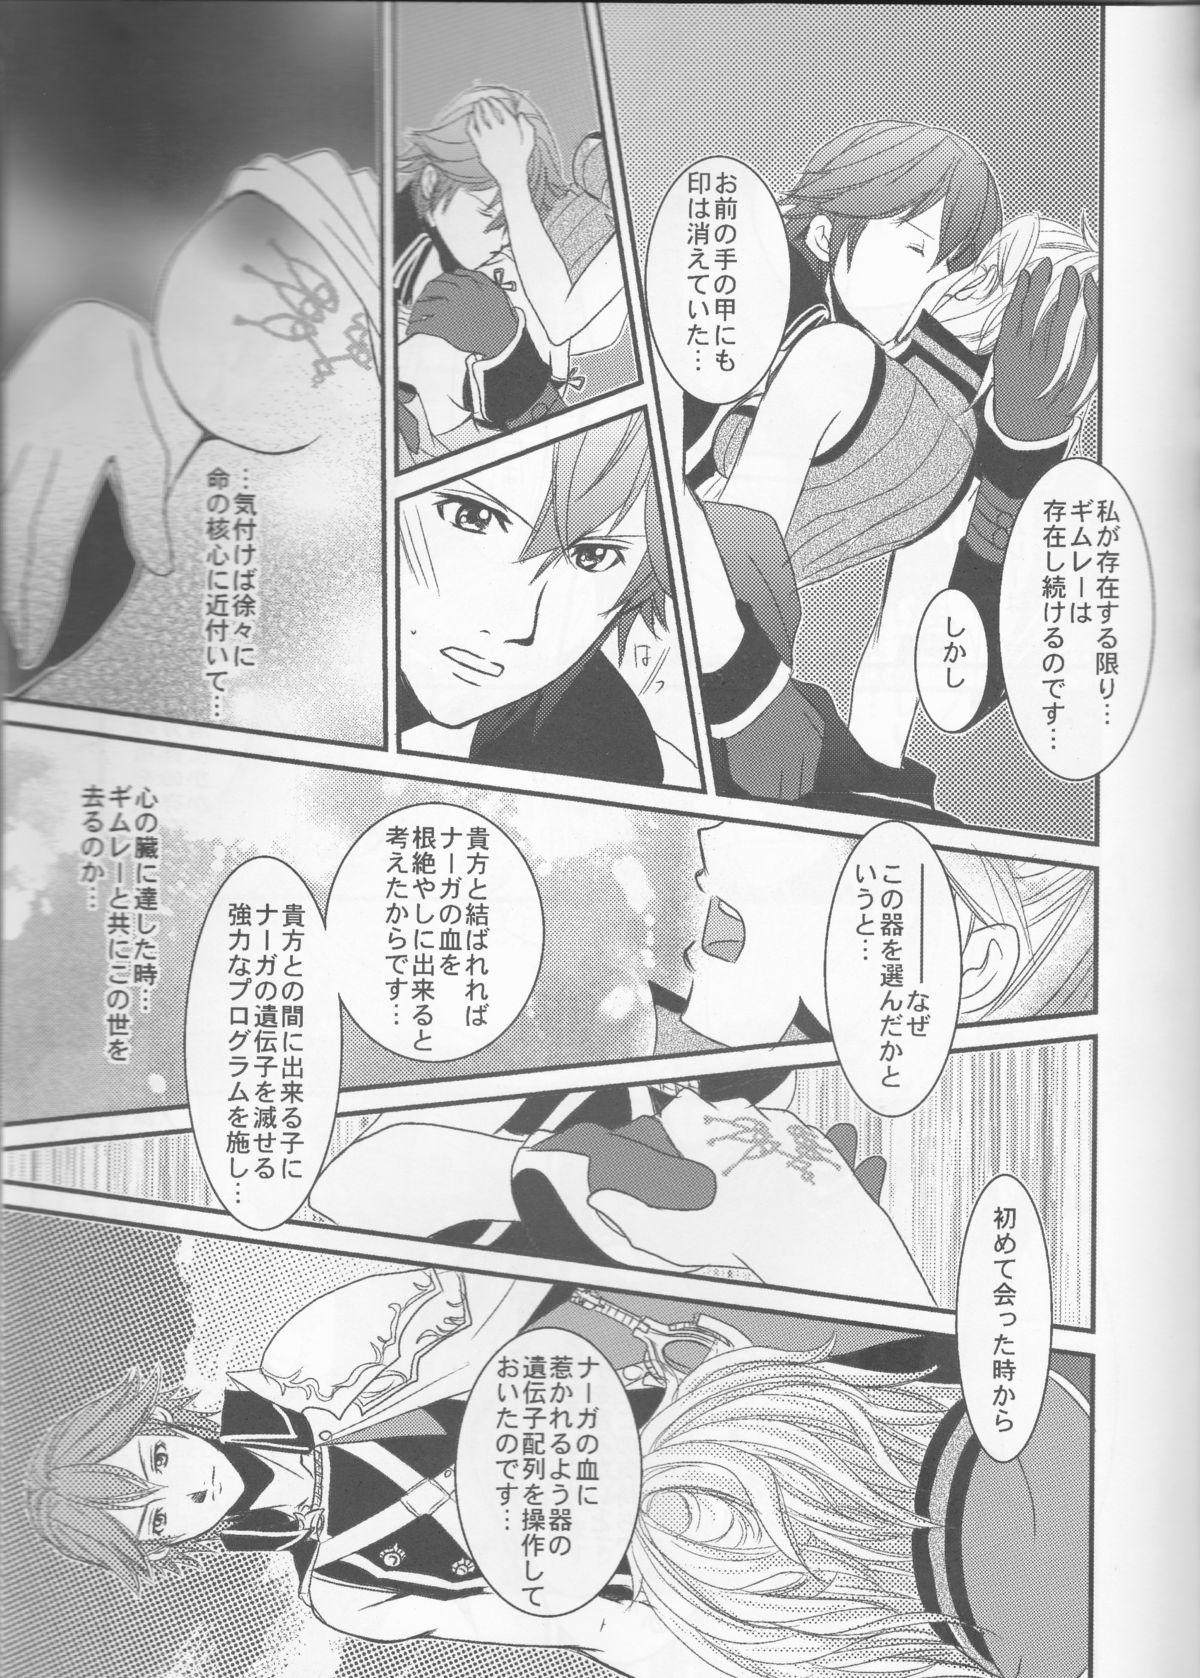 Party LORD of the RING king of Iris - Fire emblem awakening Candid - Page 7